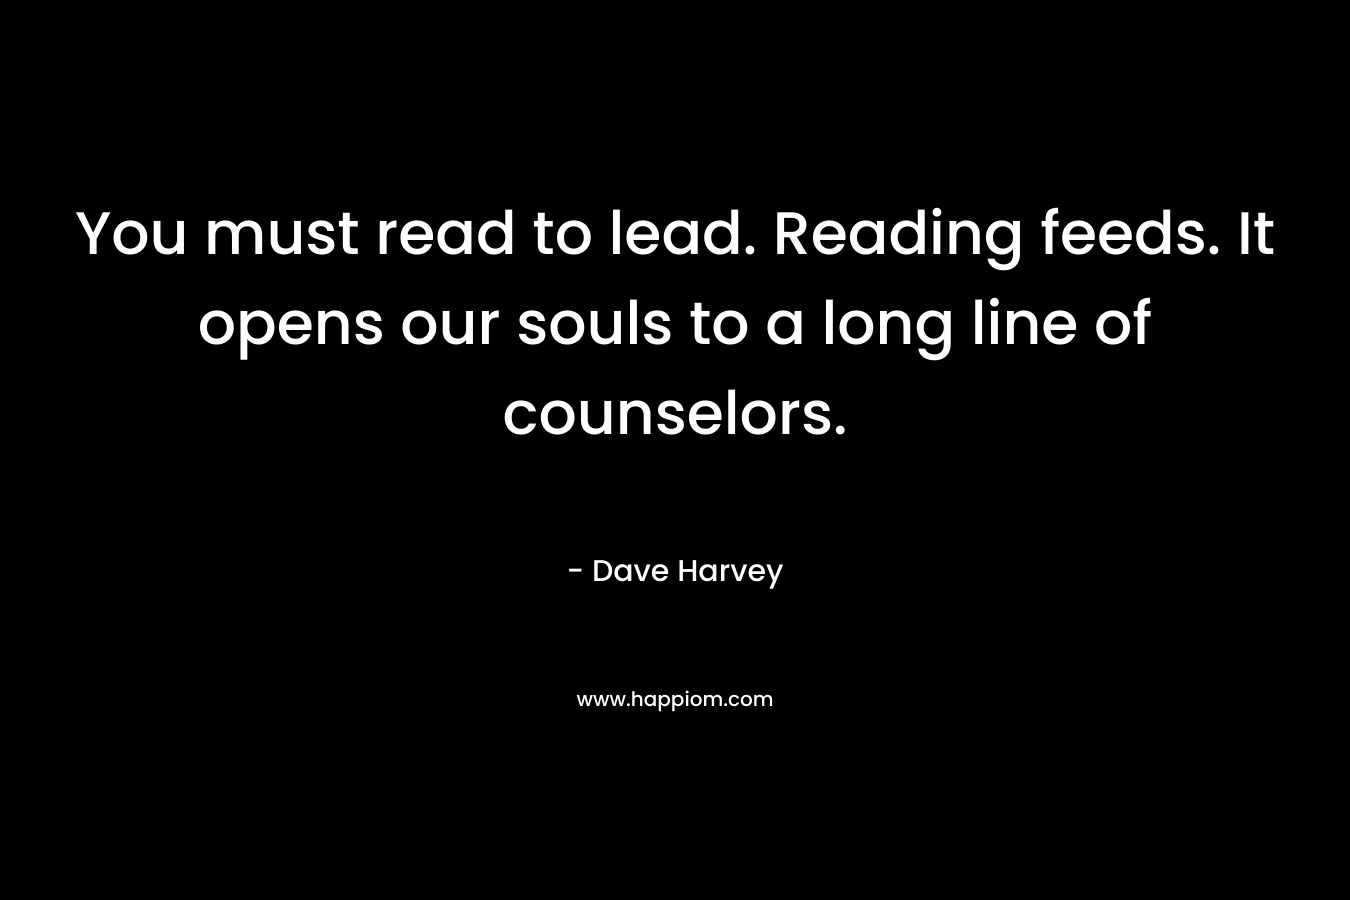 You must read to lead. Reading feeds. It opens our souls to a long line of counselors.